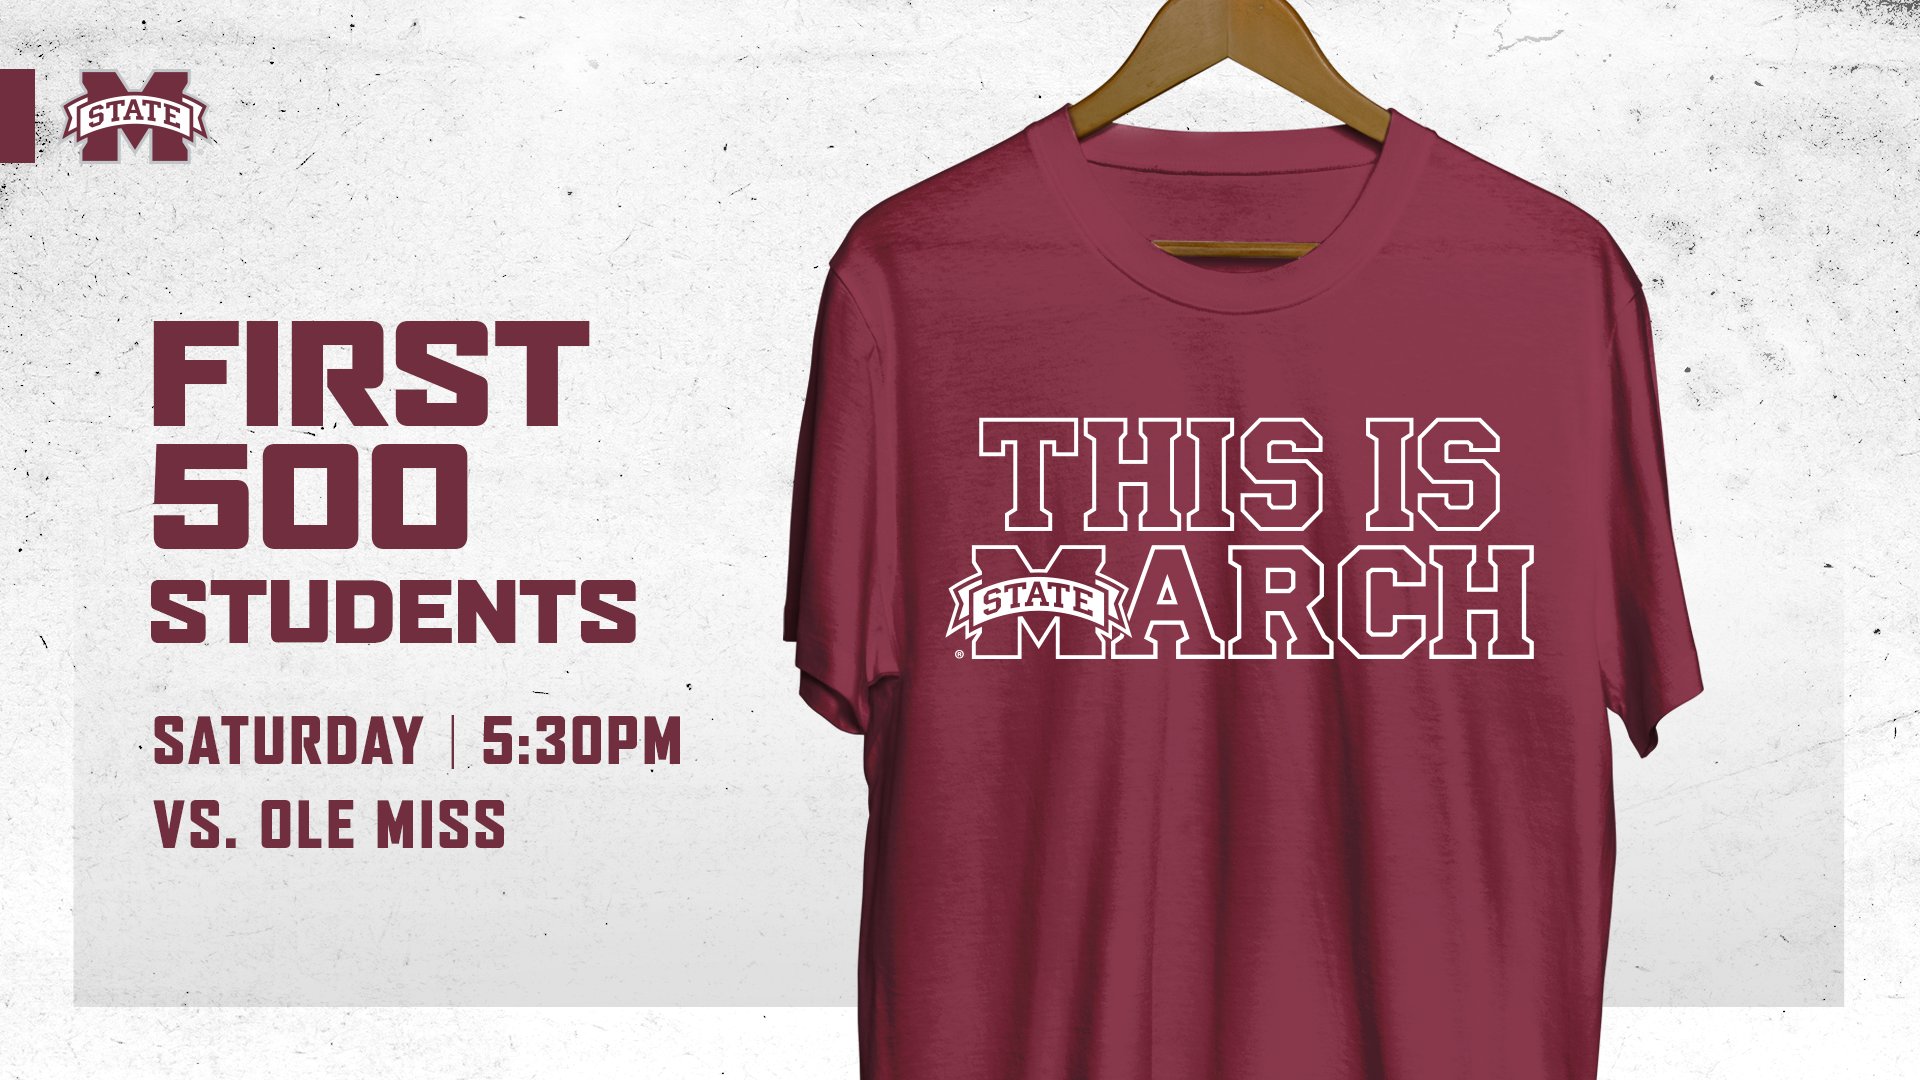 Promotional graphic for MSU Men's Basketball "This is March" T-shirt giveaway for students